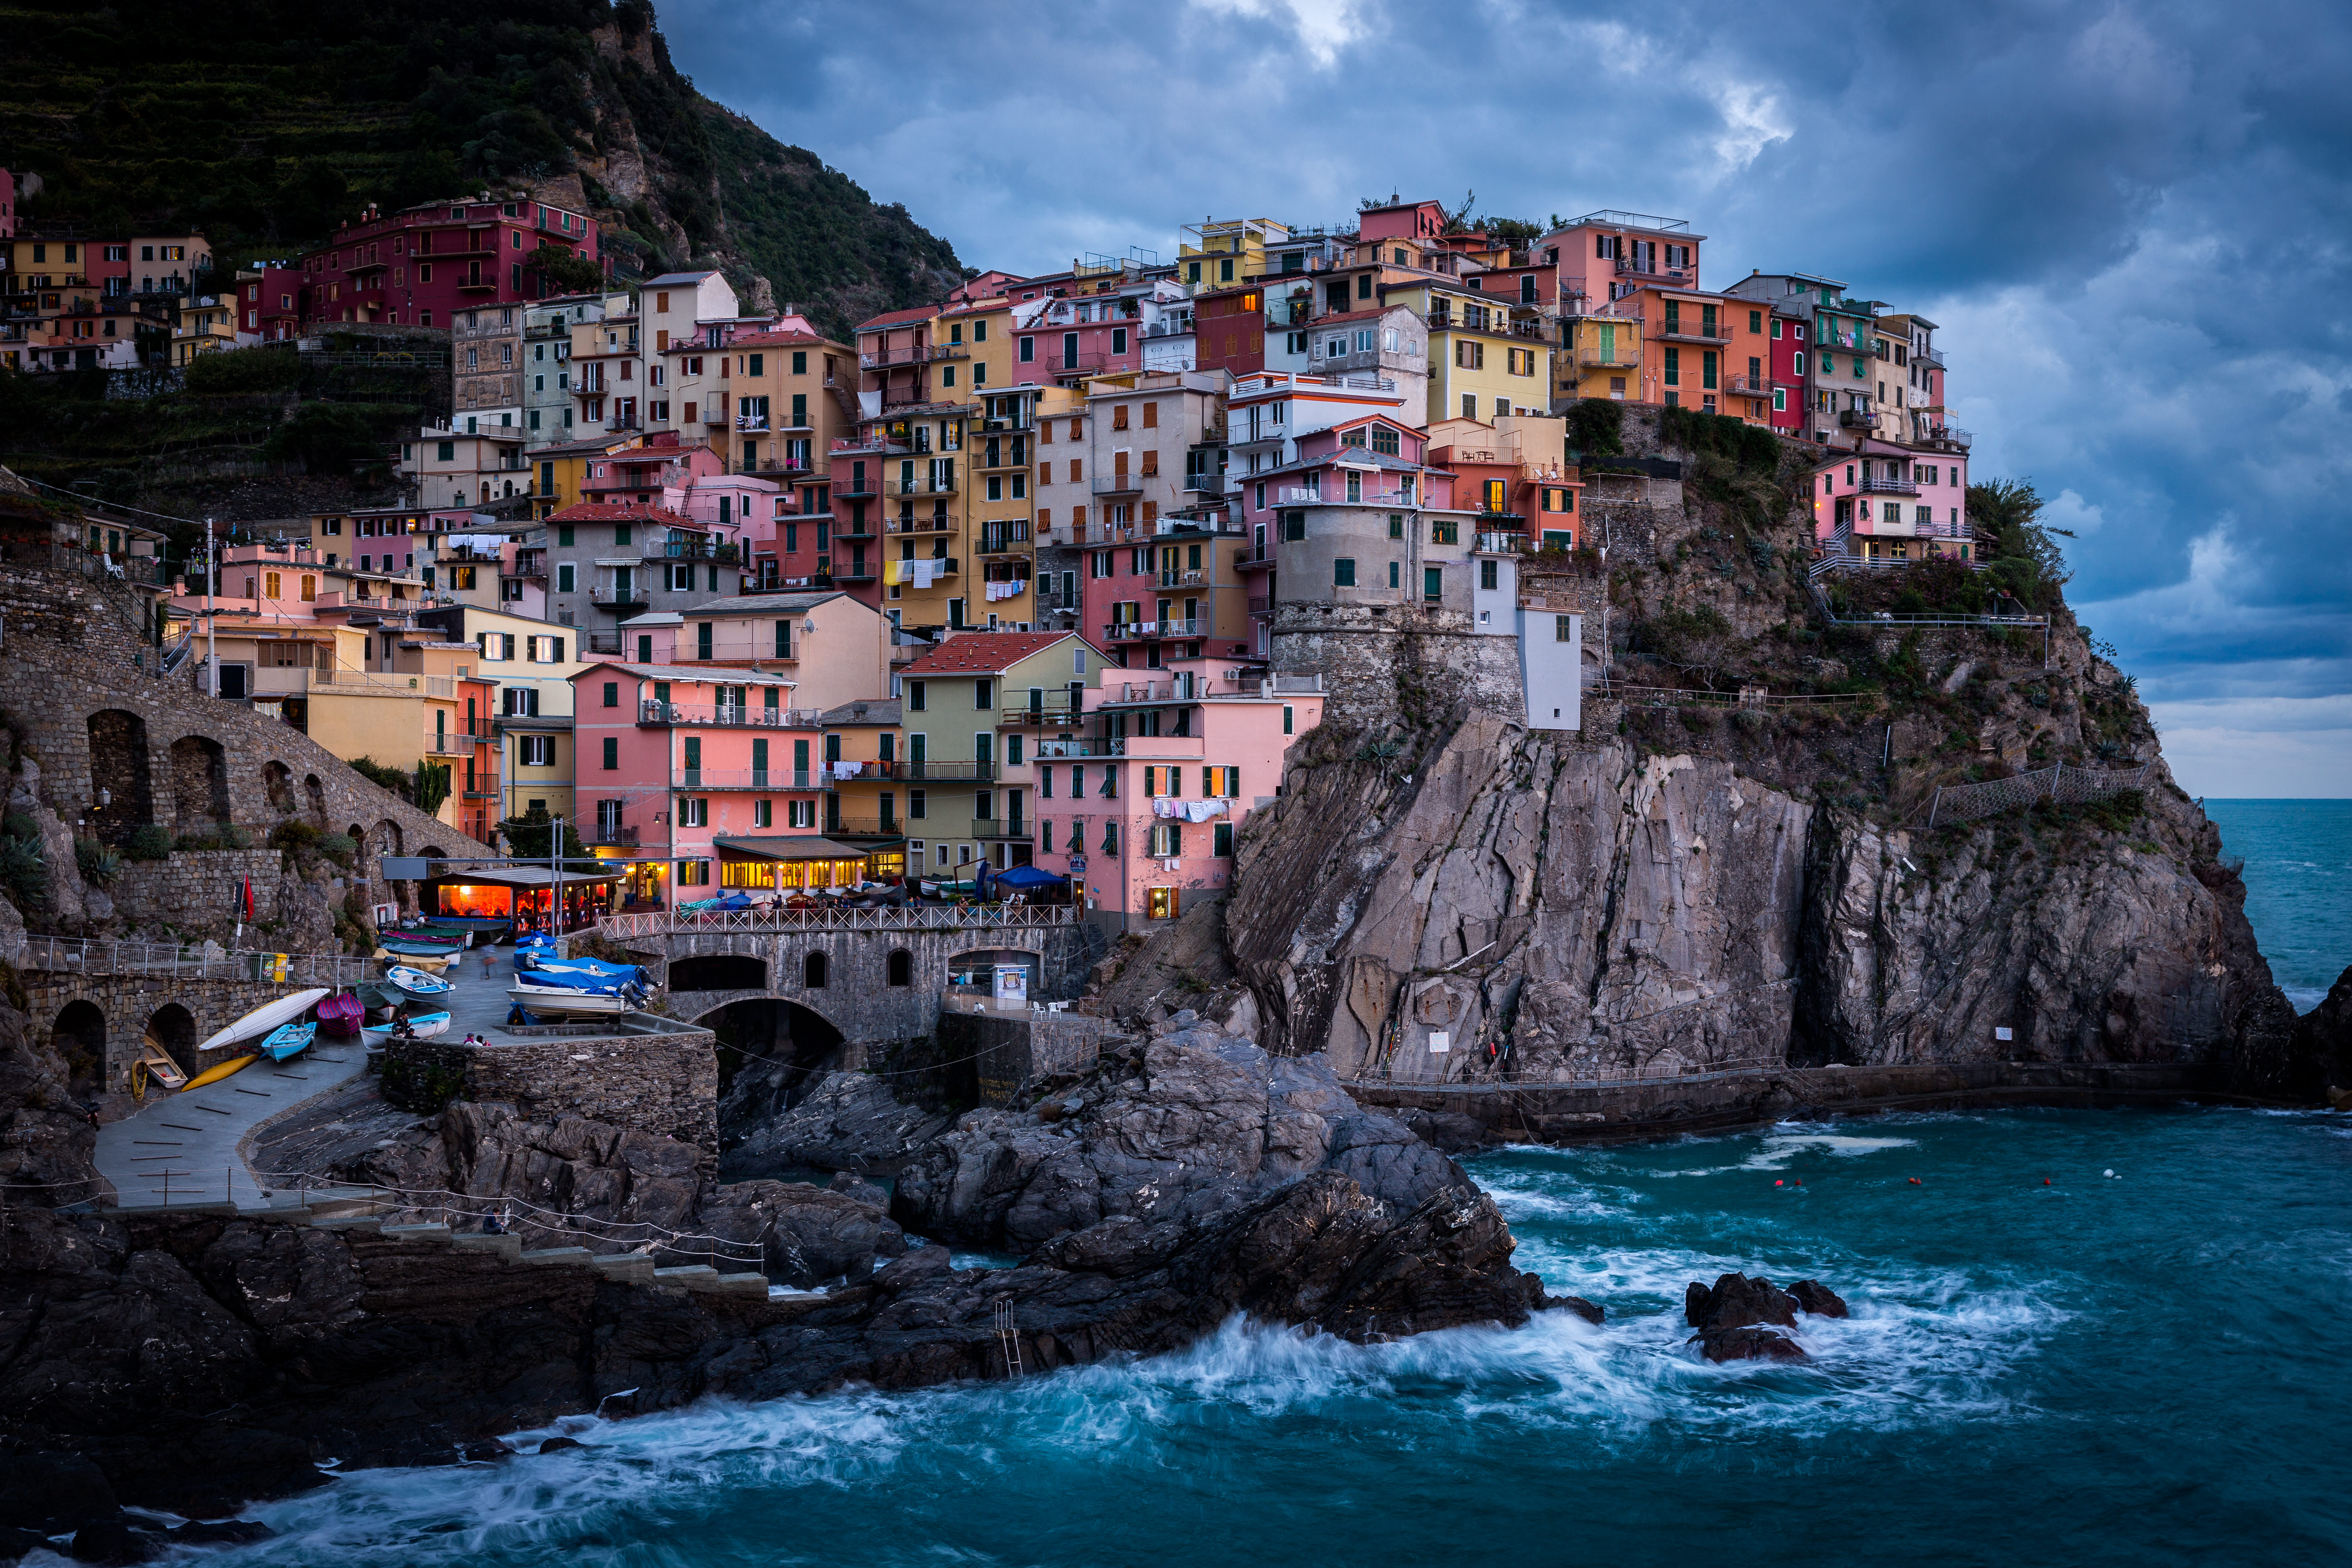 Monarola, Italy. This was taken after the sun had set and I waited a few minutes more while all the other photographers started packing up. Suddenly, a wonderful soft alpenlight bathed the buildings and made for a wonderful scene.